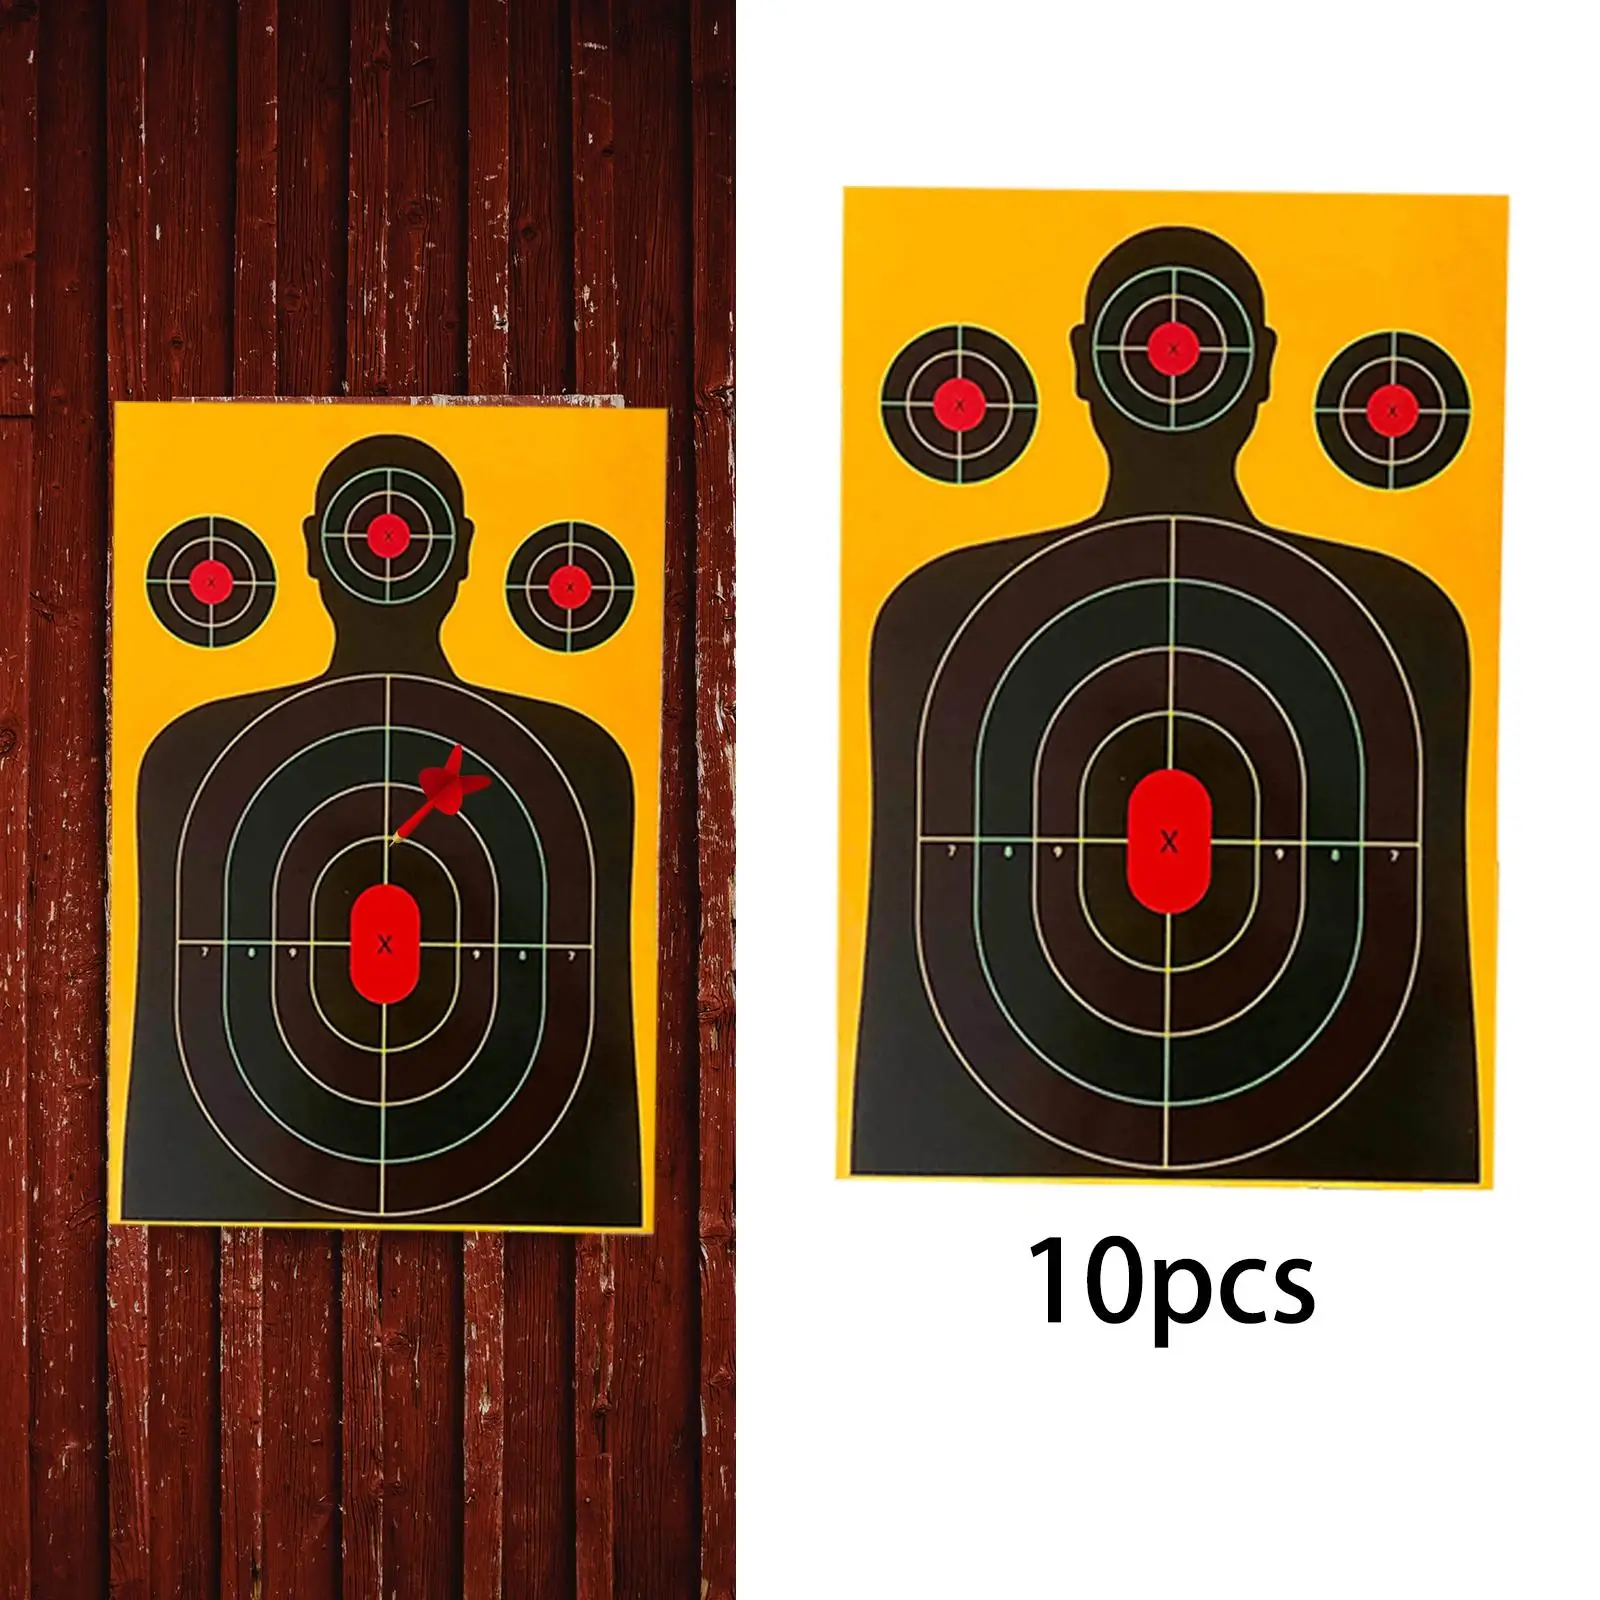 10Pcs Silhouette Target Hunting Highly Visible Letter Partition without Stand Wargame Training Target Hunting Silhouette Target